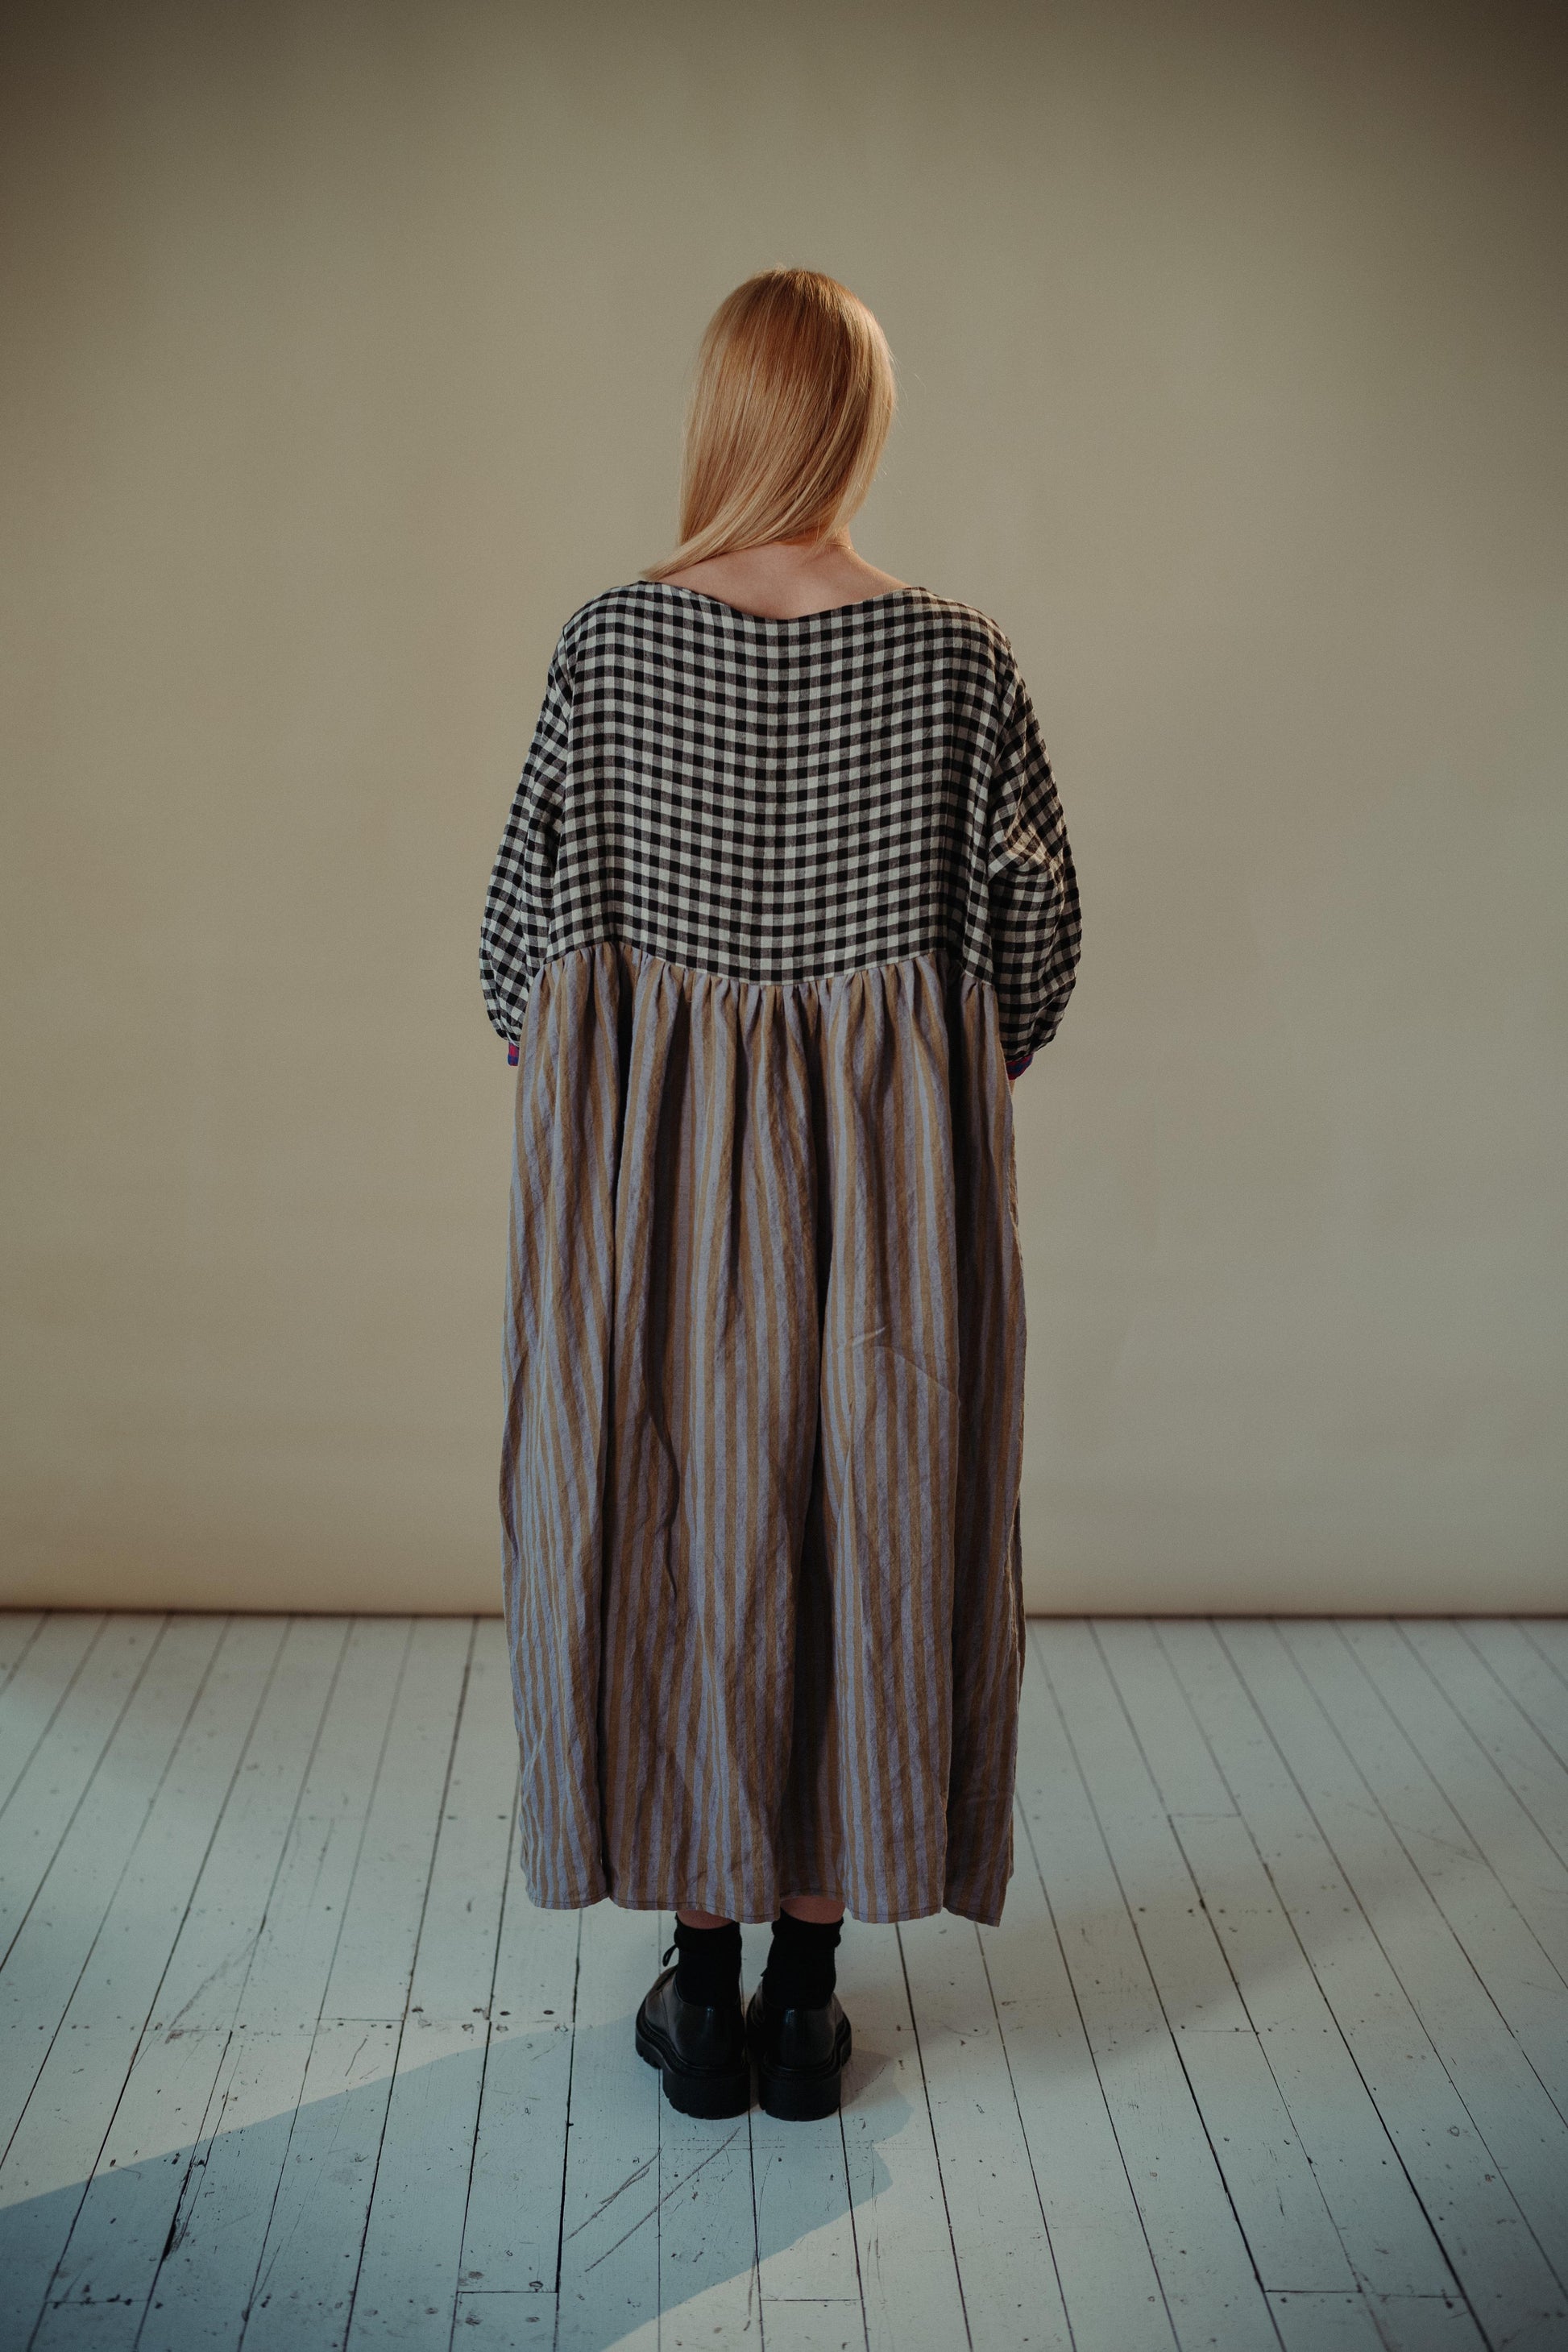 DELILAH DRESS | PATCHWORK | The Delilah Dress in patchwork. Created with beautiful soft tones of washed linen. A new silhouette for us - the dress features a longer hem and wide neckline. Works nicely with our new Mel knitted vest. Side seam pockets. Made